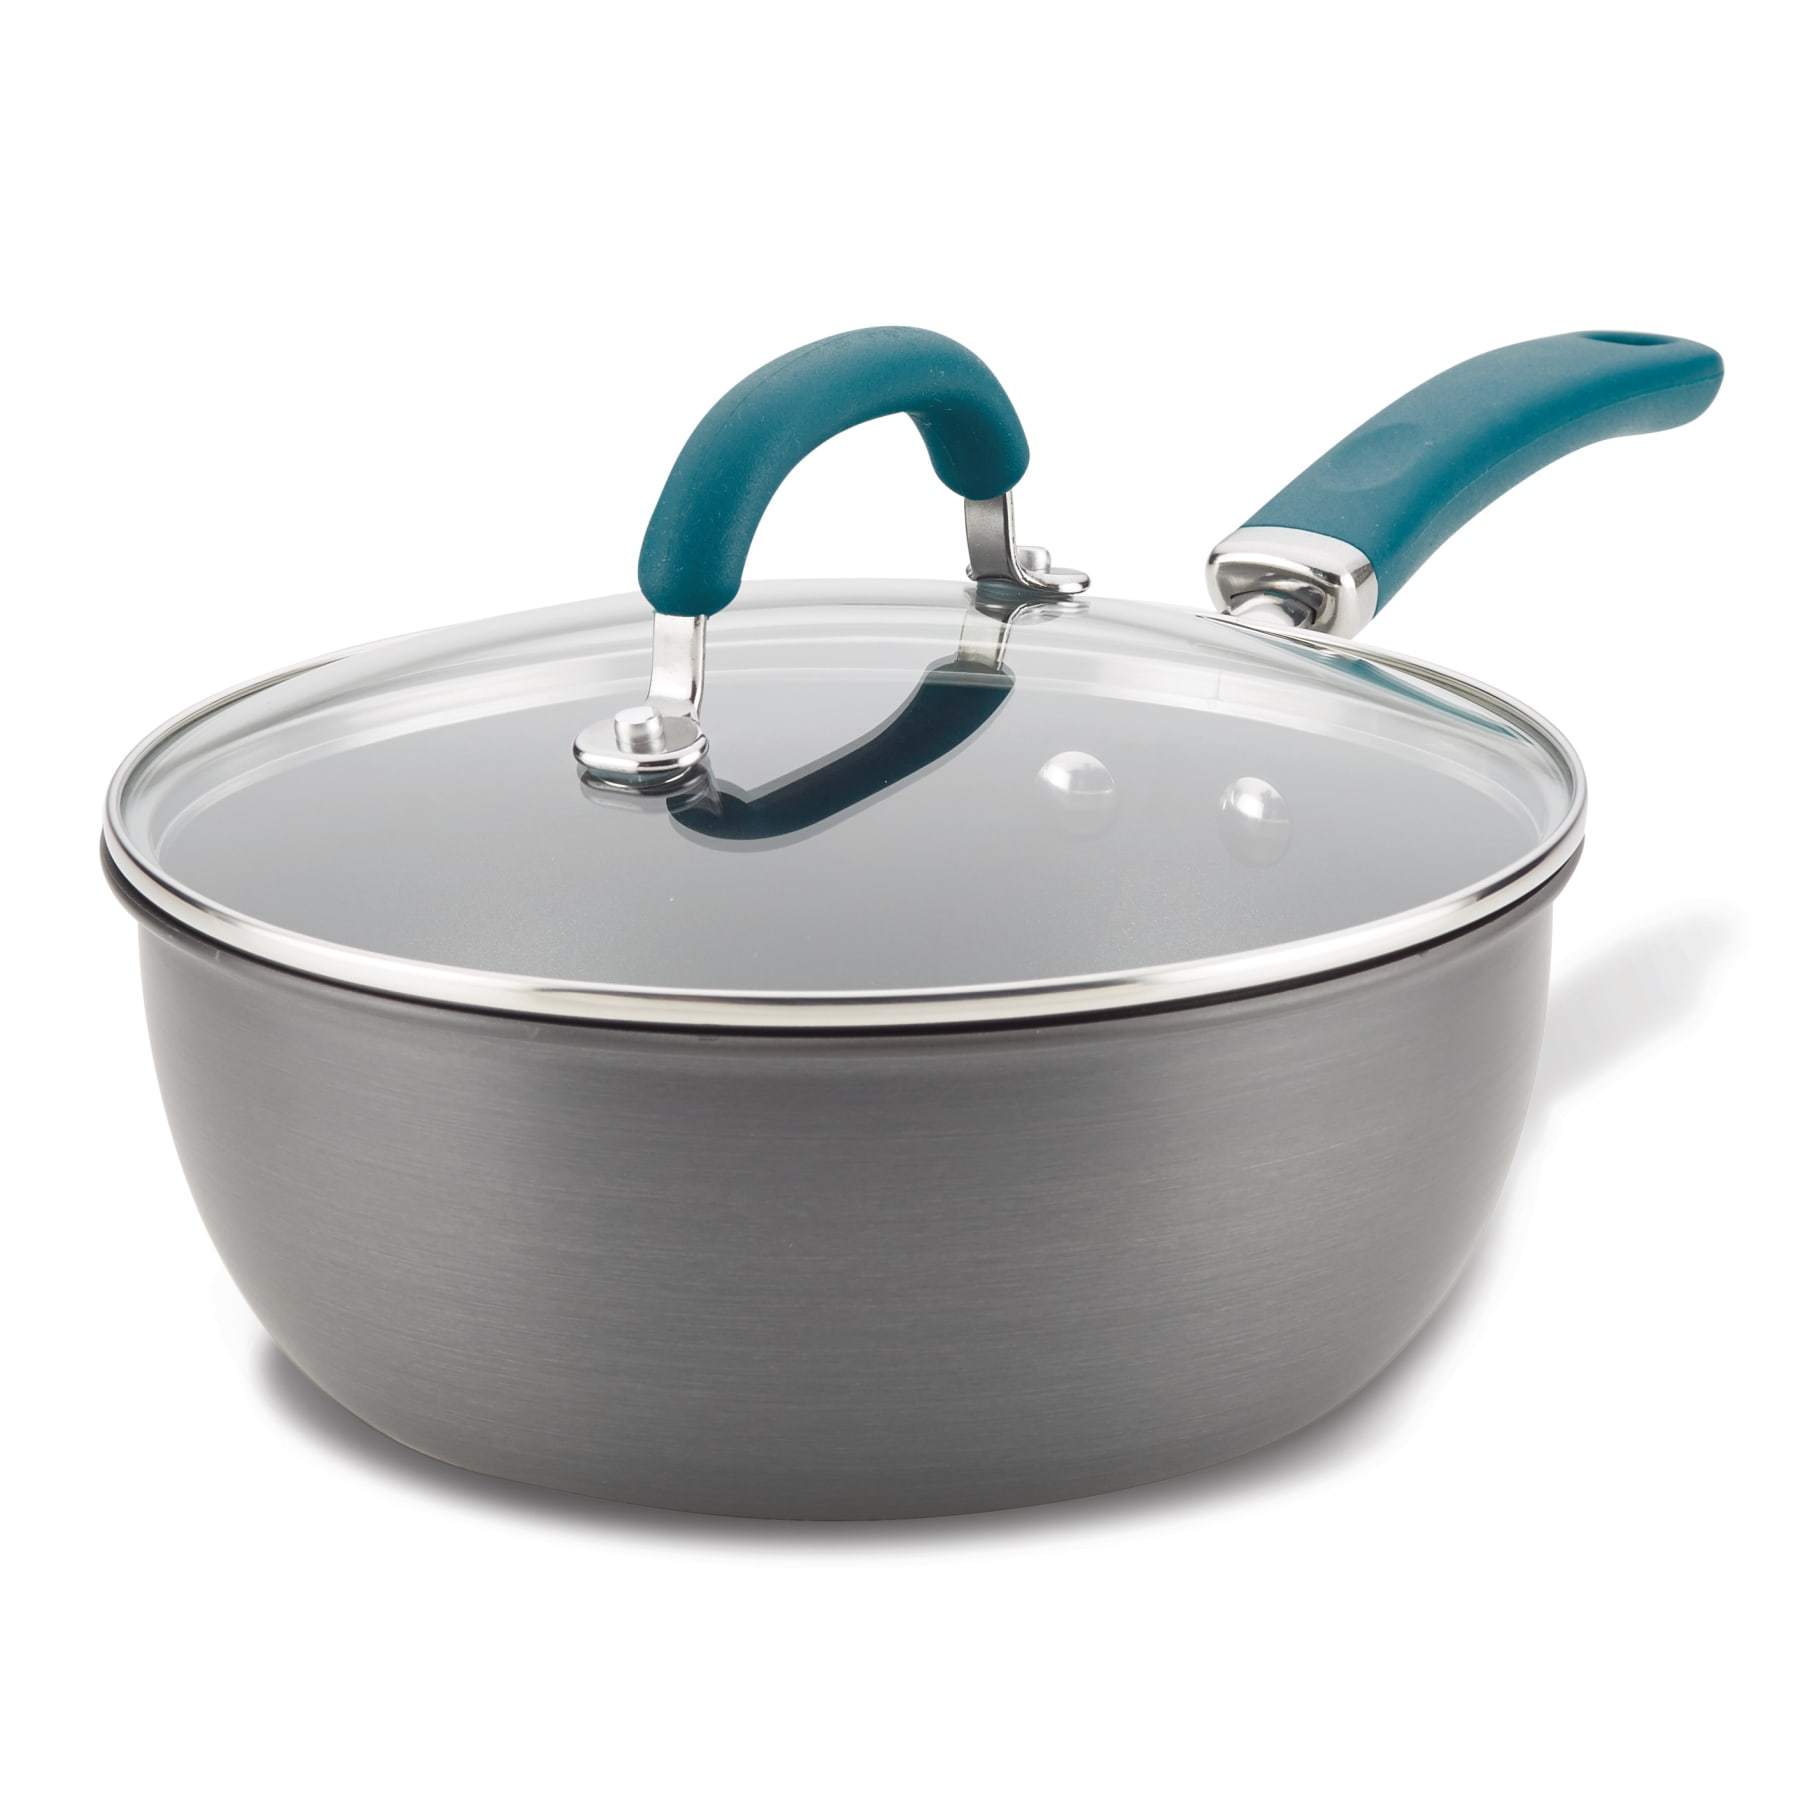 Rachael Ray Hard Anodized 3-Quart Covered Saucier